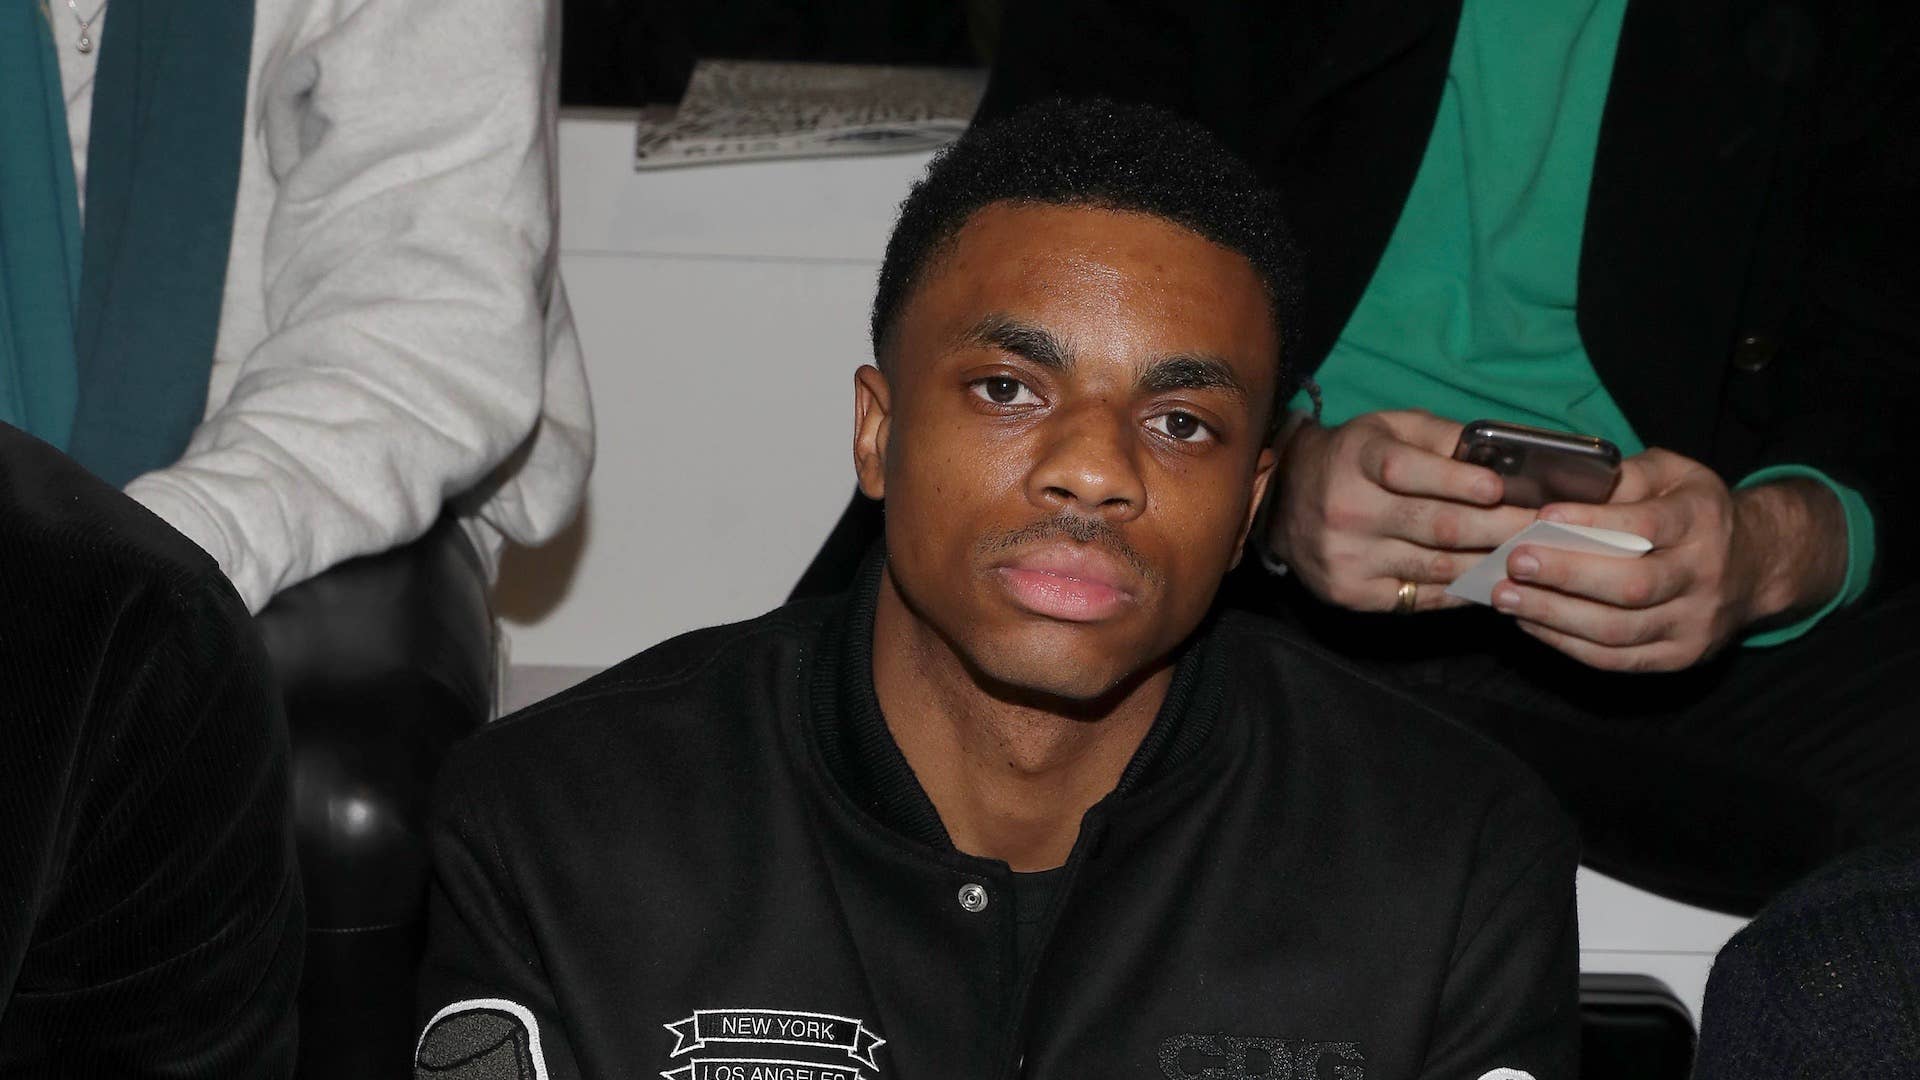 Recording artist Vince Staples attends the 2020 Tokyo Olympic collection fashion show